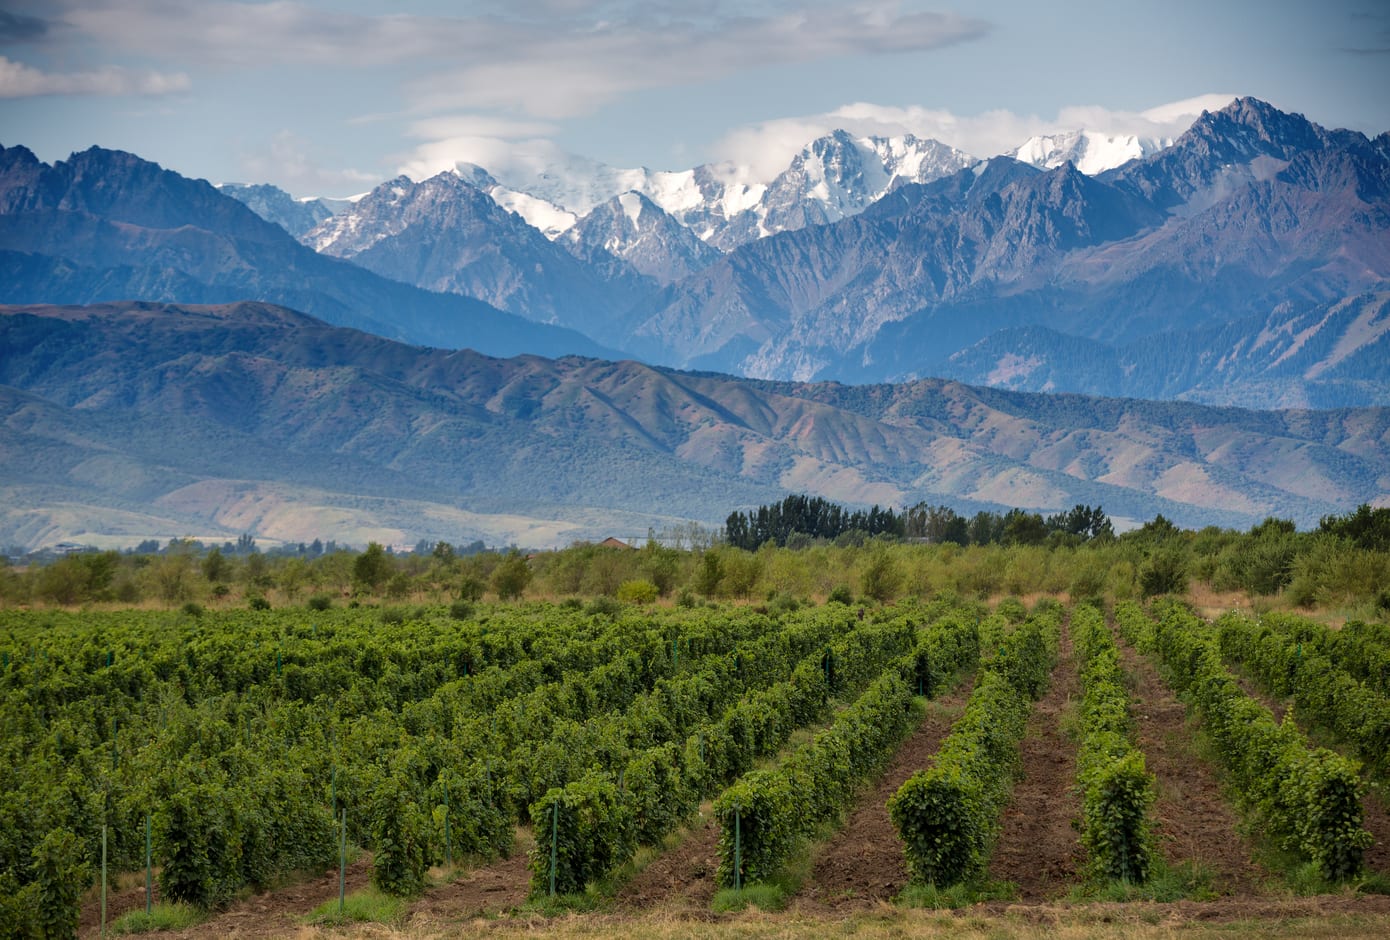 A Vineyard framed by snow-capped mountains in Mendoza, Argentina.